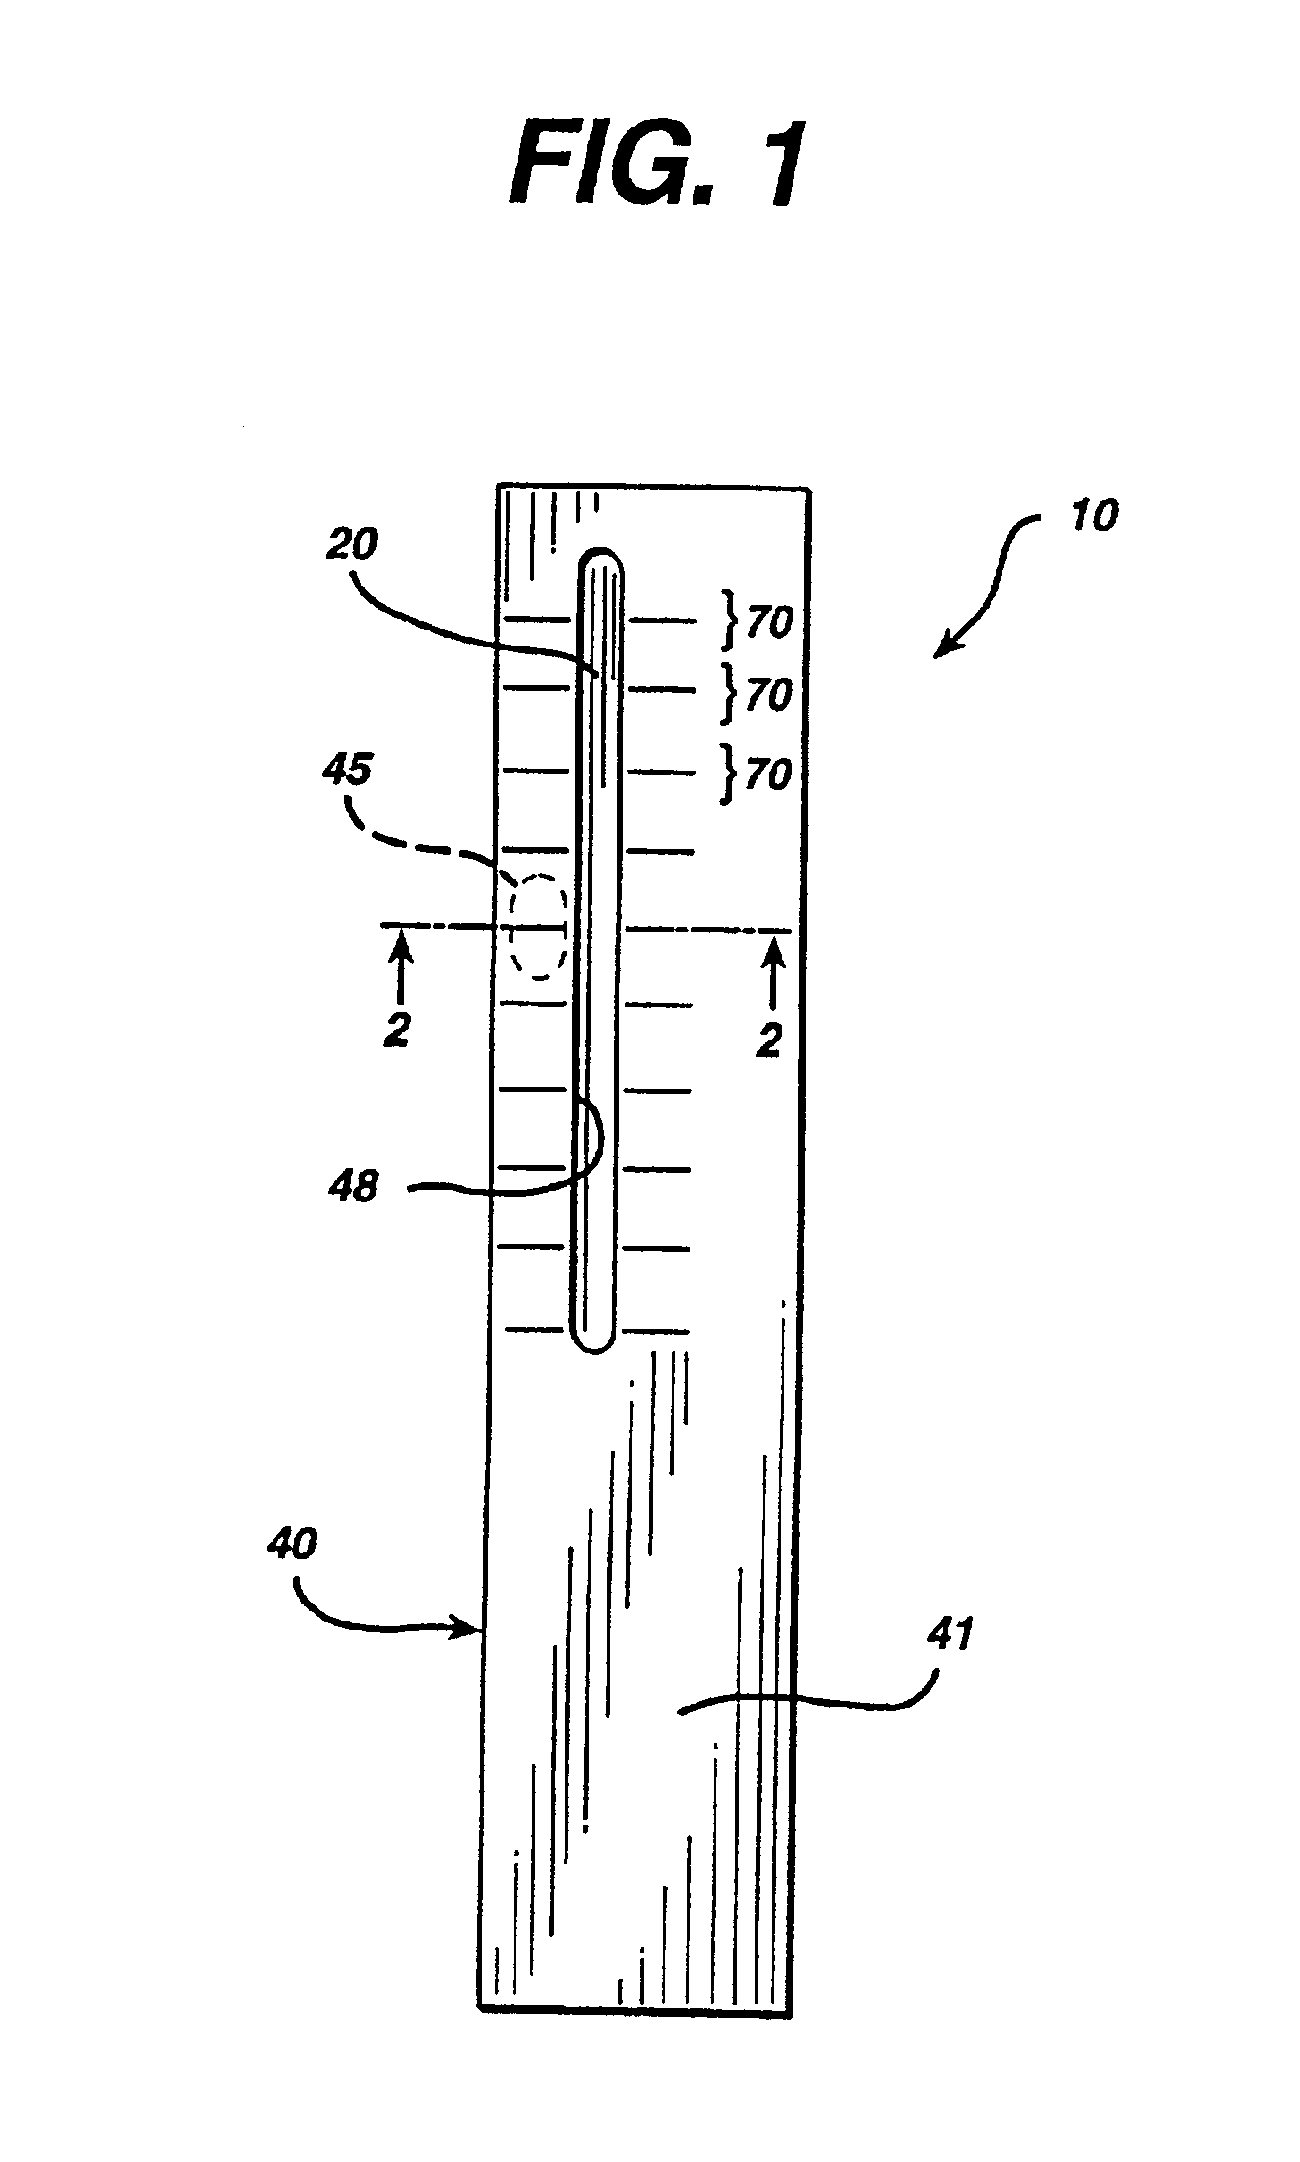 Method of making a test strip for determining analyte concentration over a broad range of sample volumes